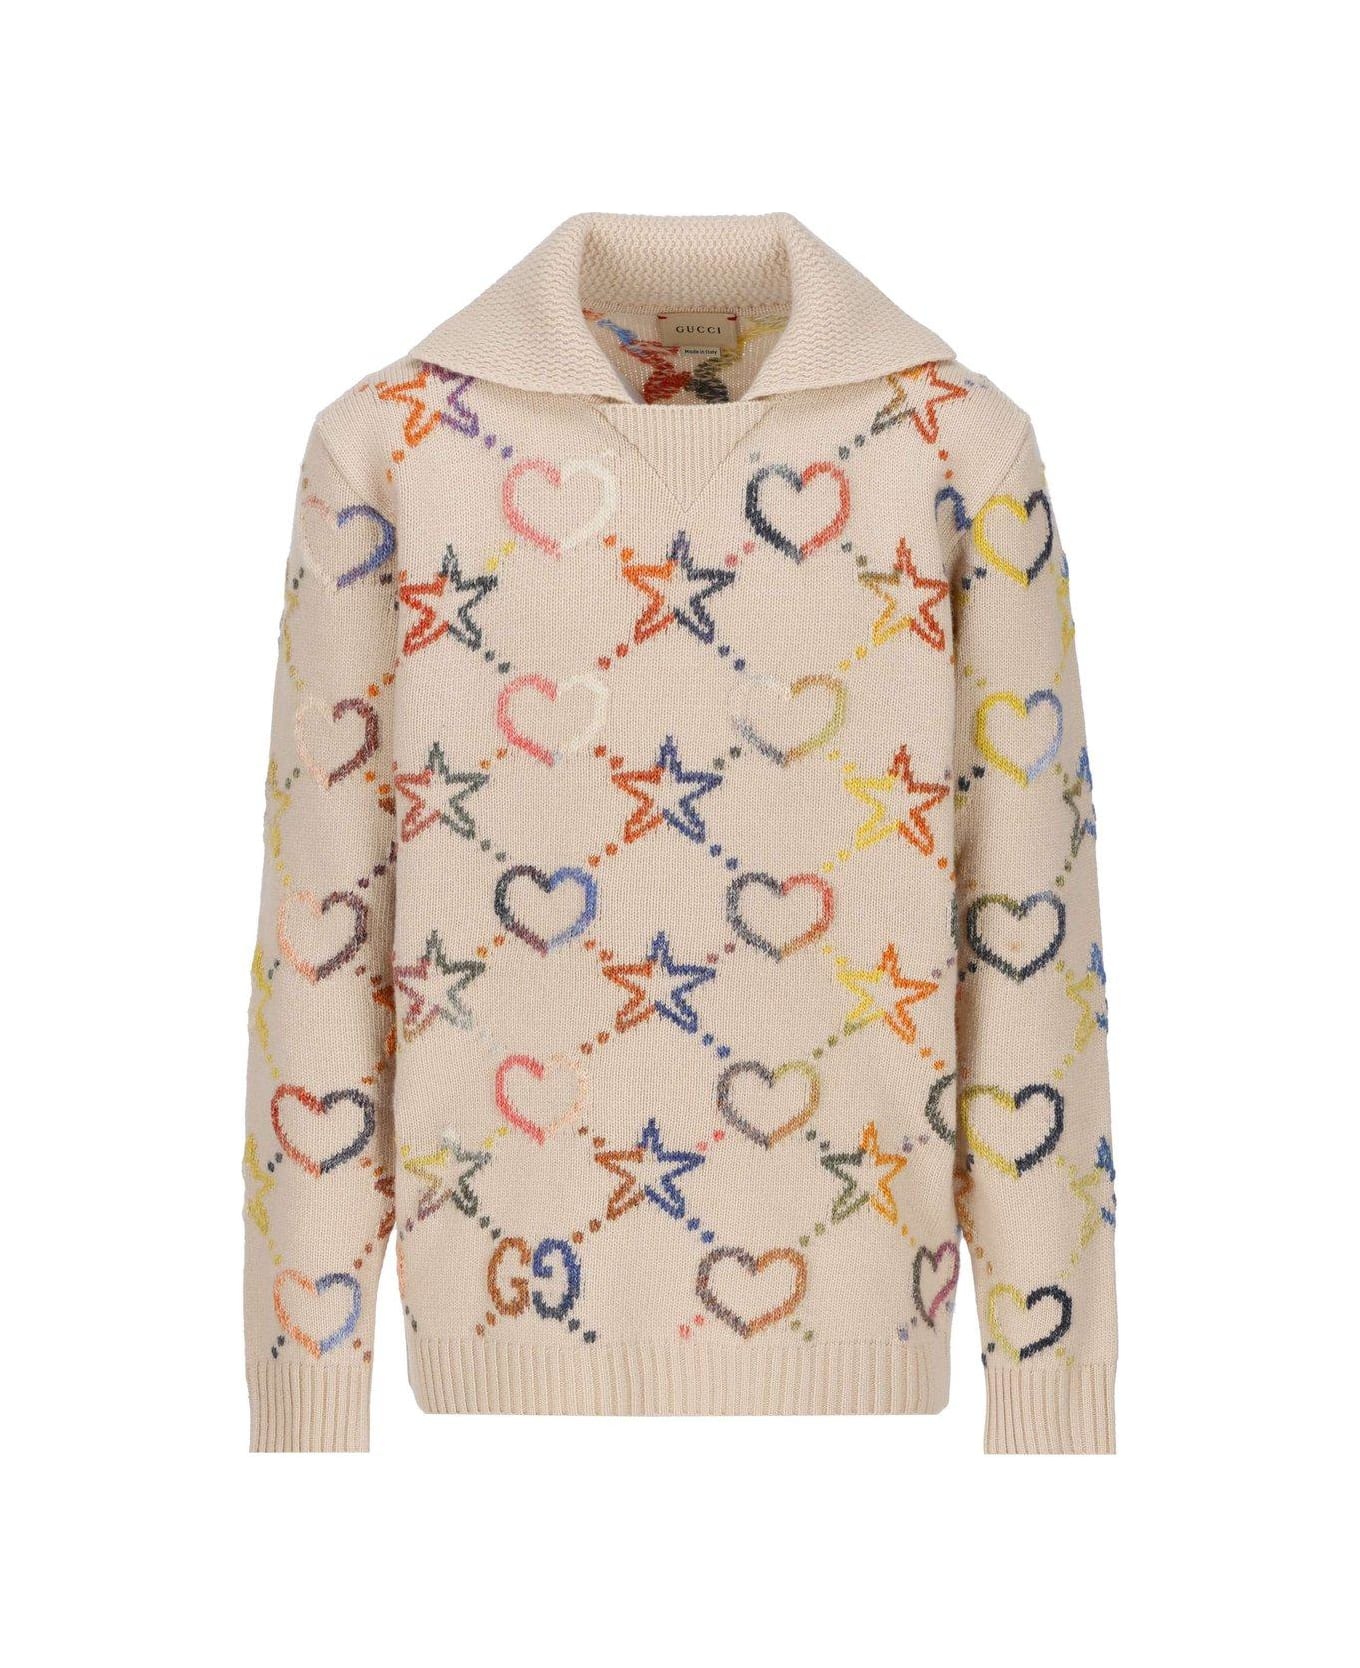 Gucci All-over Patterned Long-sleeved Jumper - Ivory Multicolor